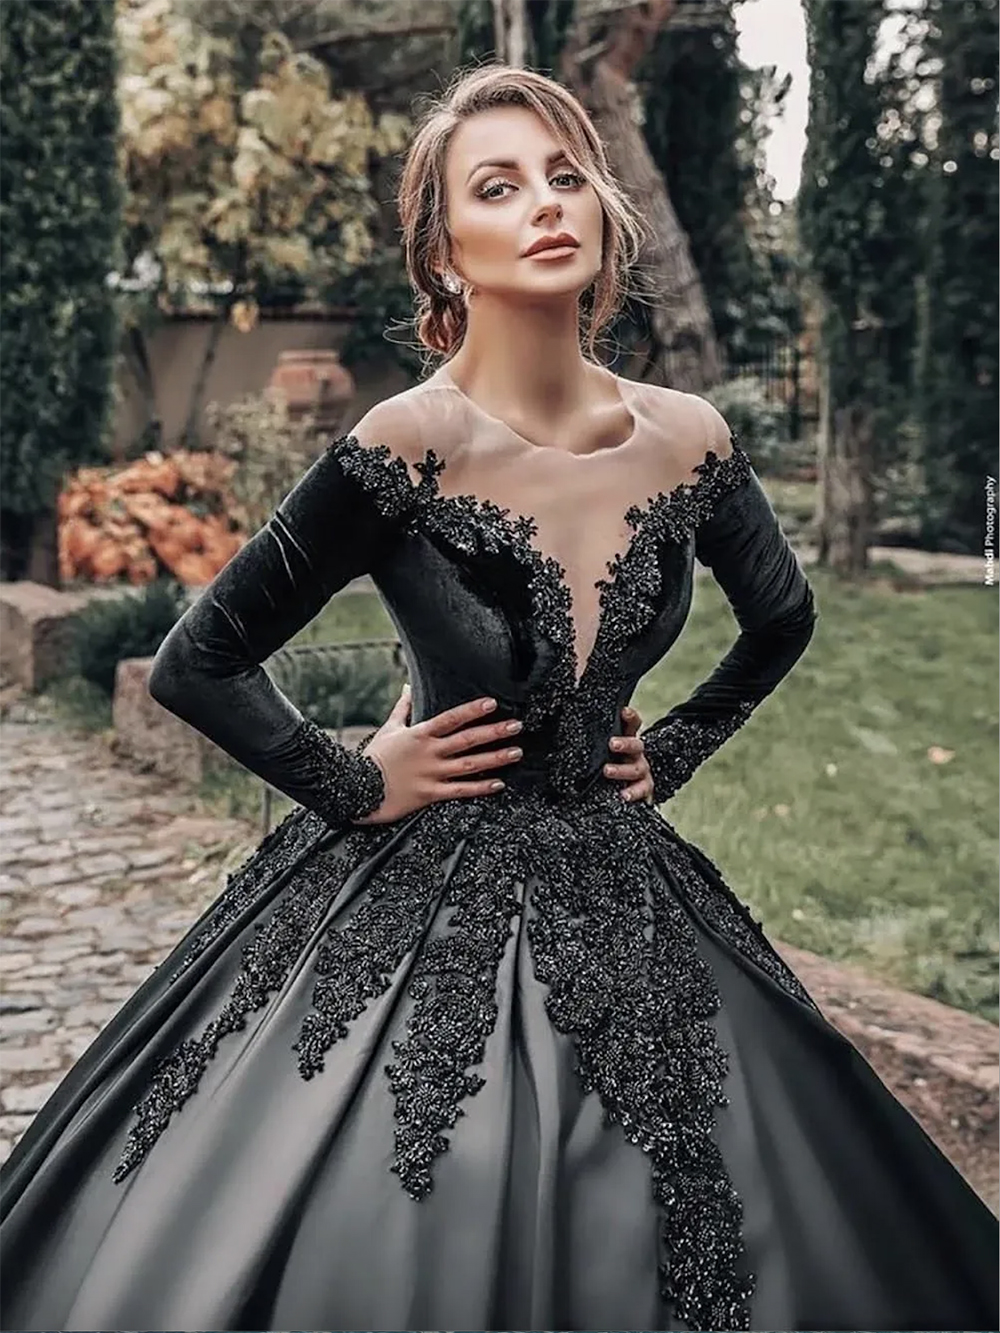 Bridal Gowns Black Wedding Dresses Formal Long Sleeve Satin Applique Beaded Illusion Plus Size New Custom Button A Line O-Neck